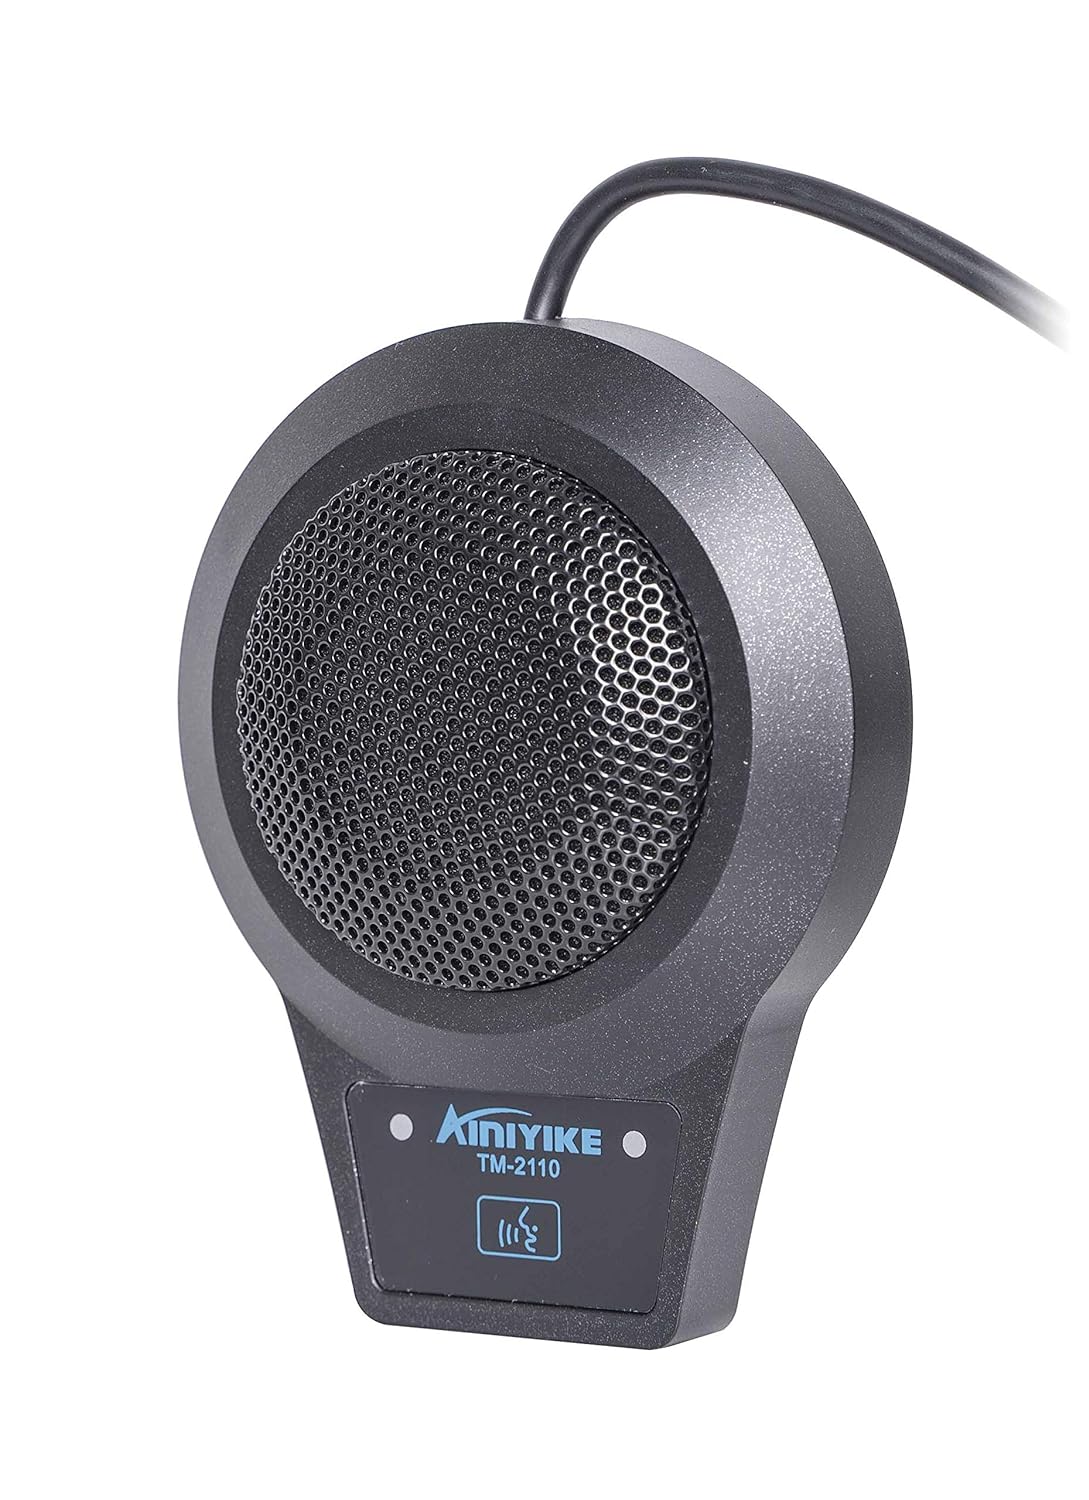 AInIYIKE TM-2110 Conference USB Microphone for Computer Desktop and Laptop with 360° / 20' Long Pick Up Range Compatible with Windows and Mac for Dictation, Recording, YouTube, Conference Call, Skype